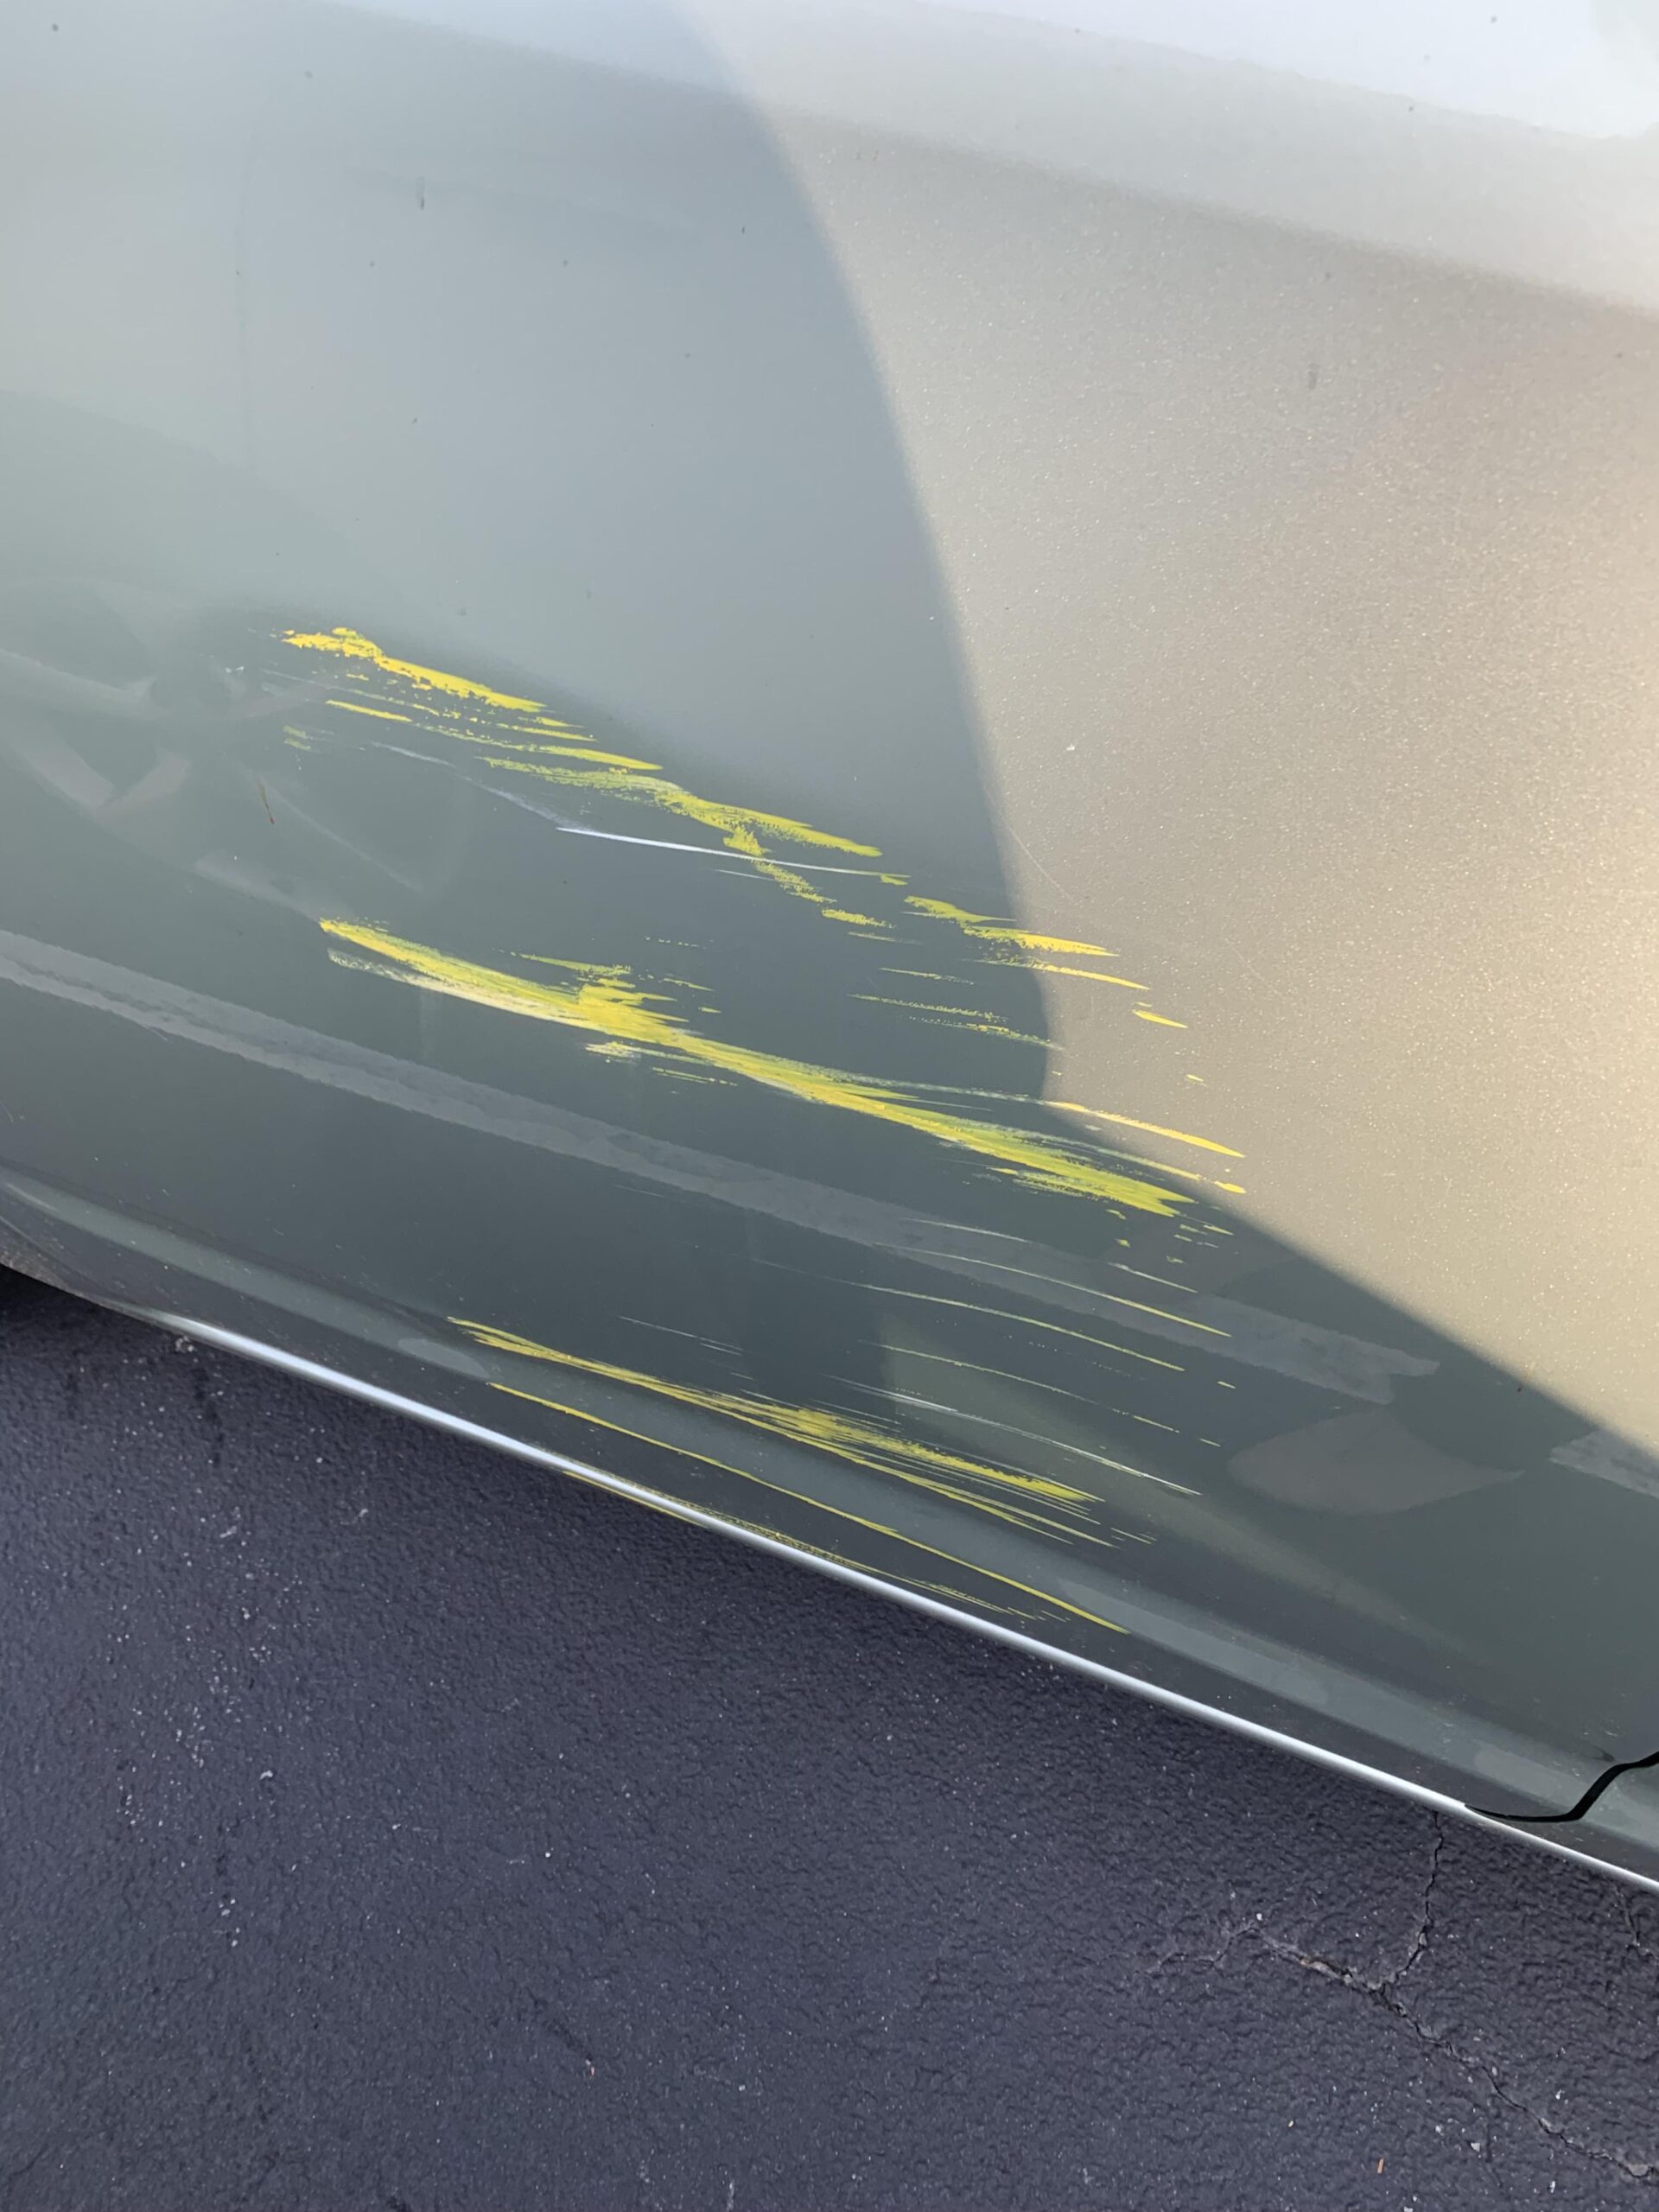 How to Get Yellow Pole Paint off Car